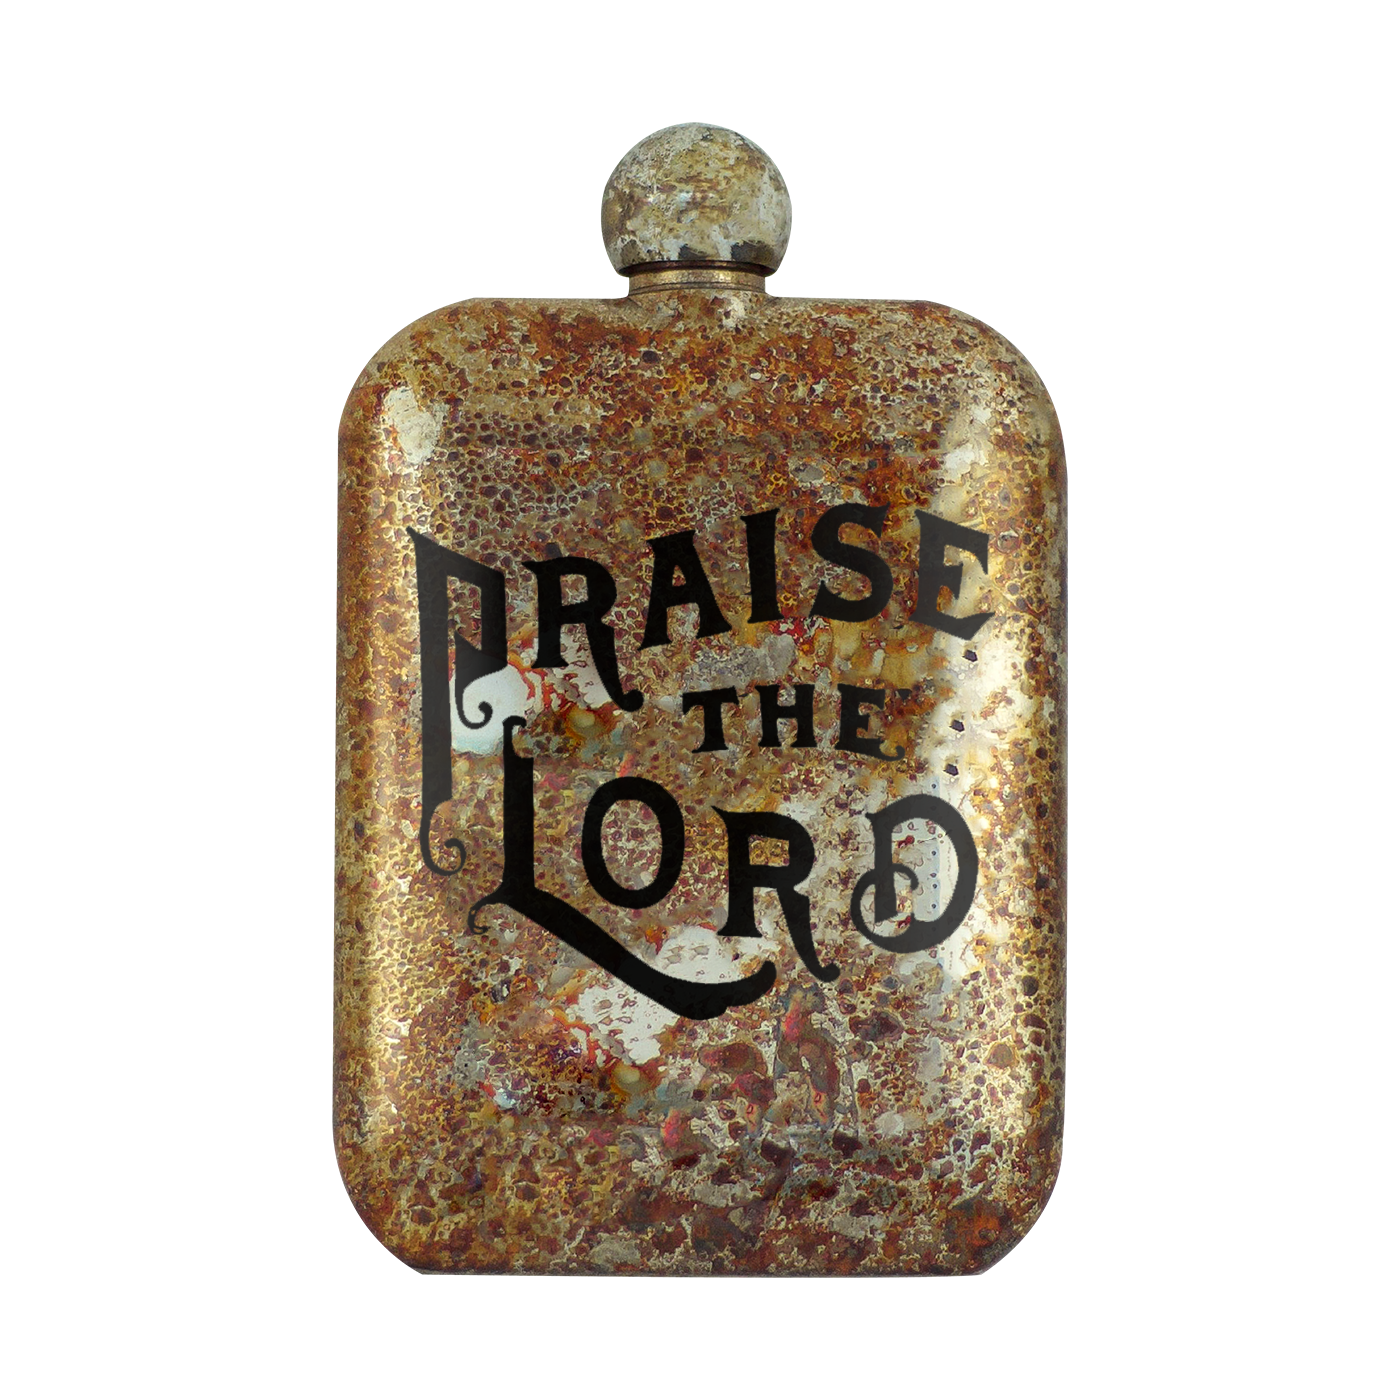 PRAISE THE LORD WHISKEY FLASK by The Sneerwell